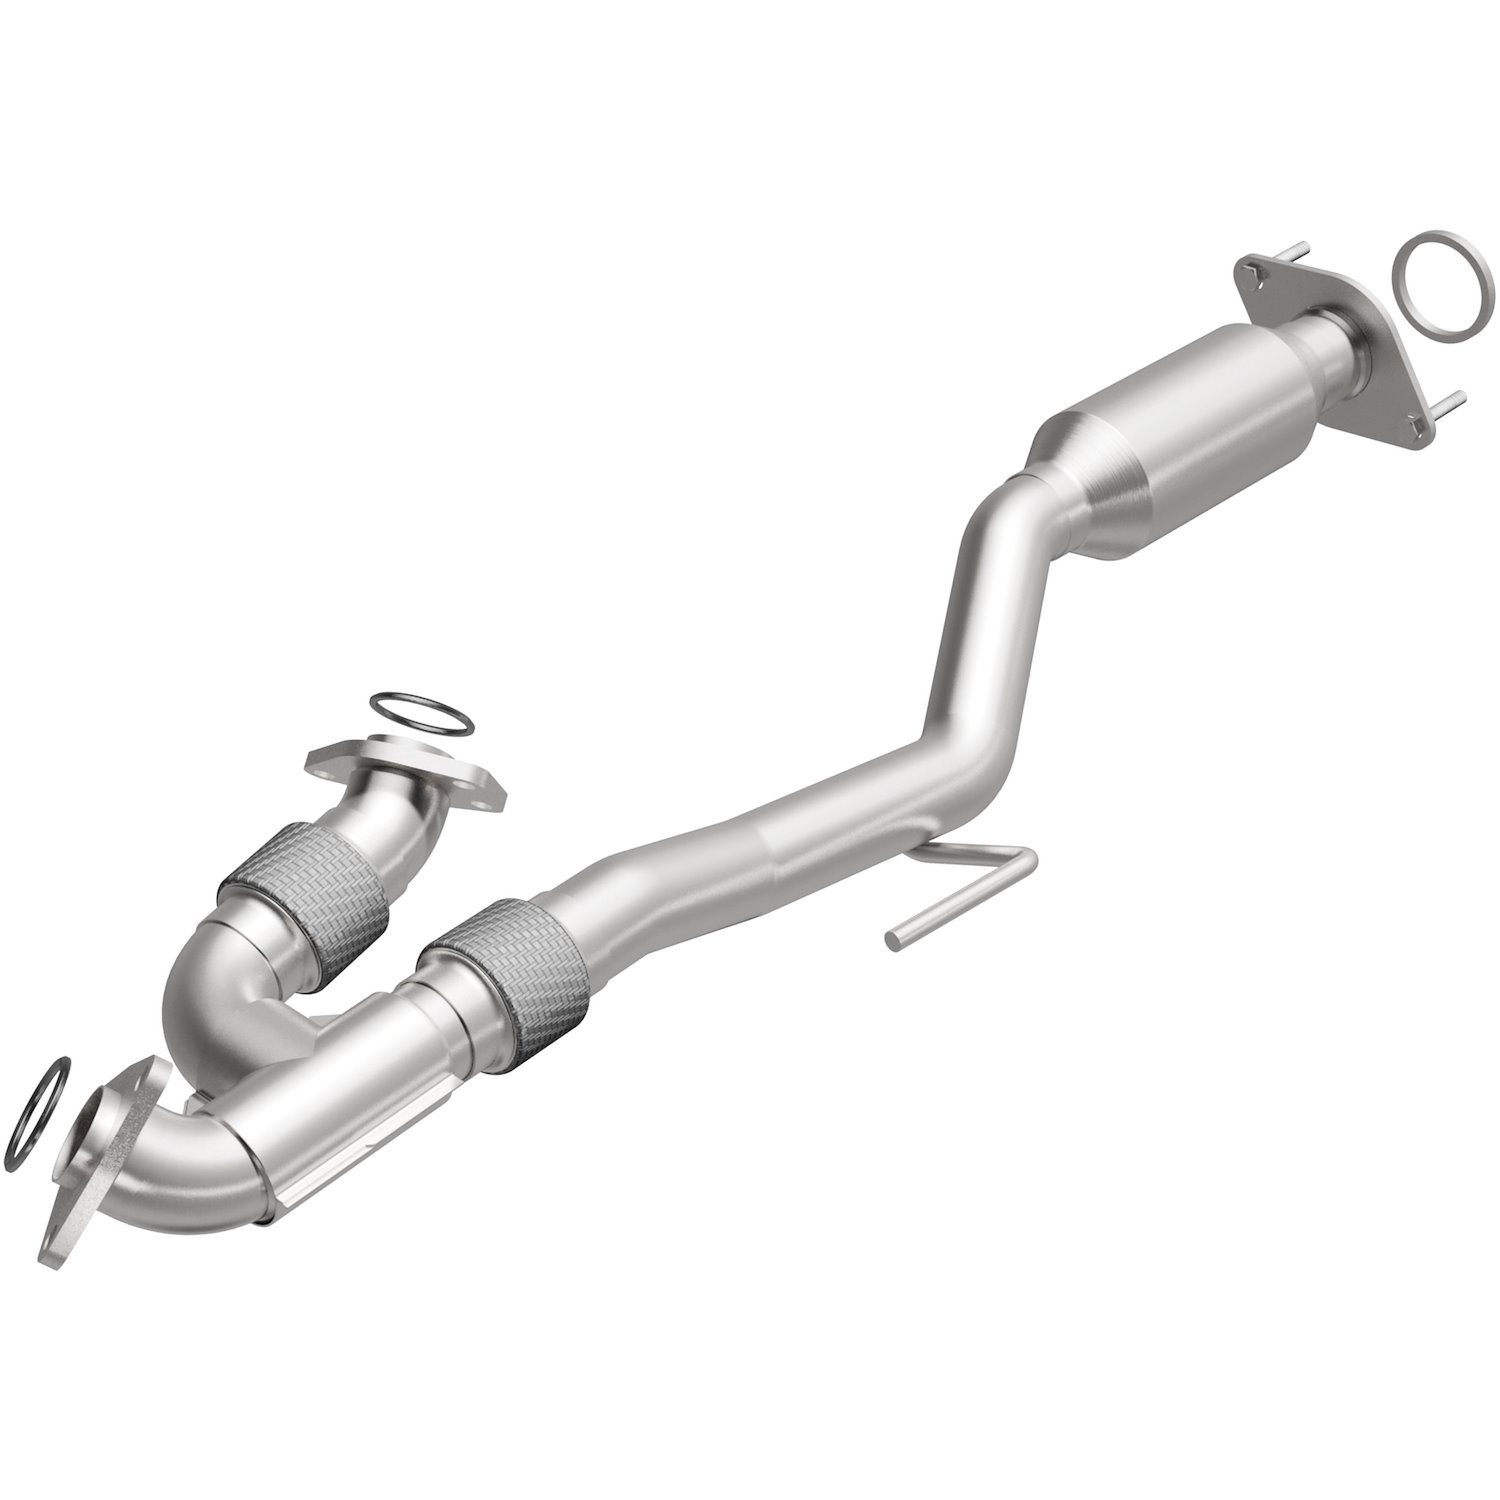 2011-2014 Nissan Quest California Grade CARB Compliant Direct-Fit Catalytic Converter